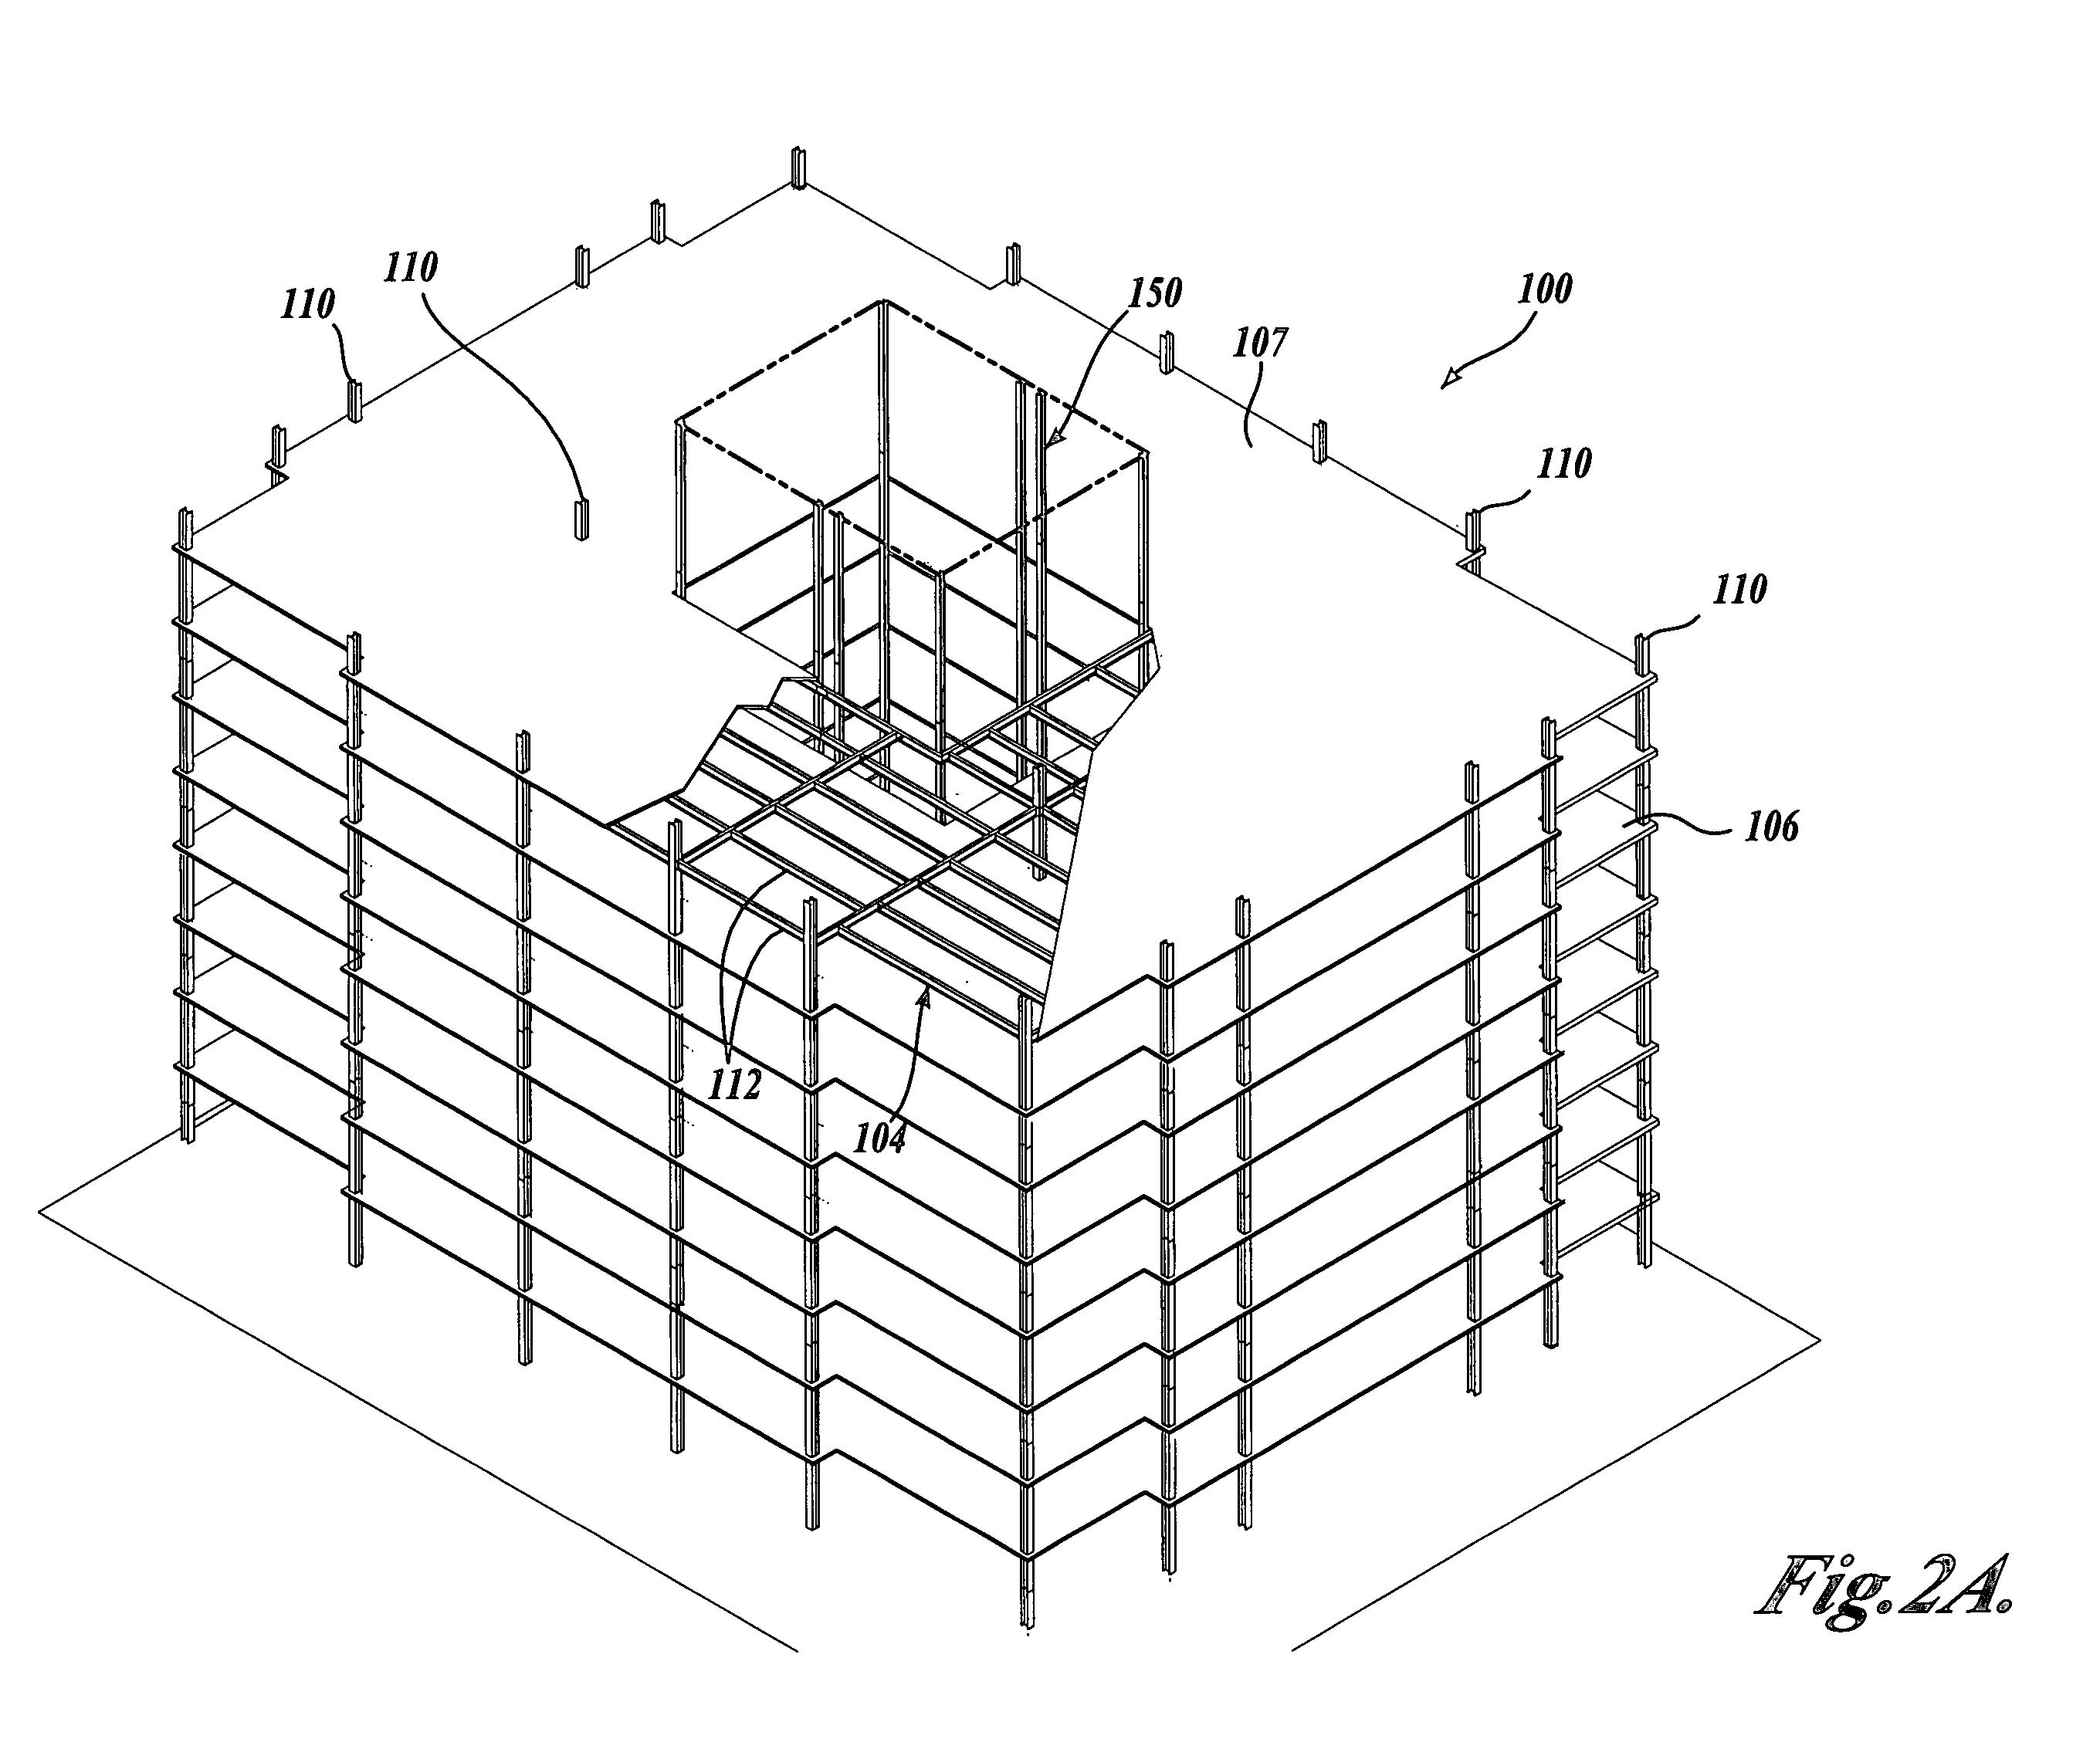 Method of constructing a concrete shear core multistory building